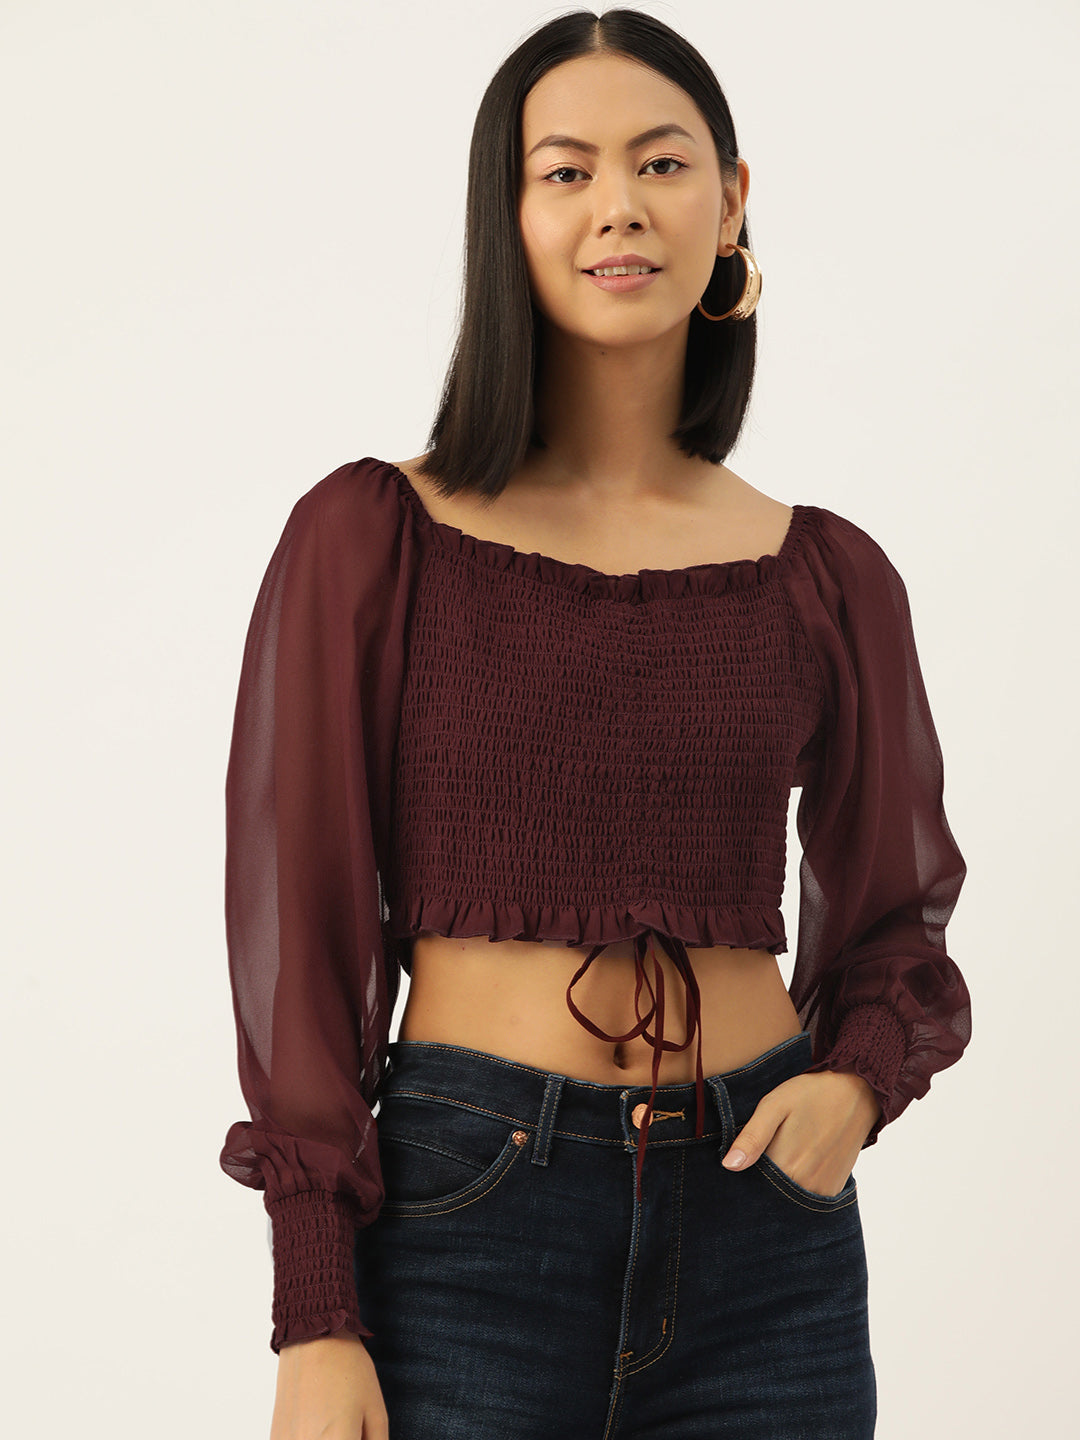 Cropped Puff Sleeve Smocked Top